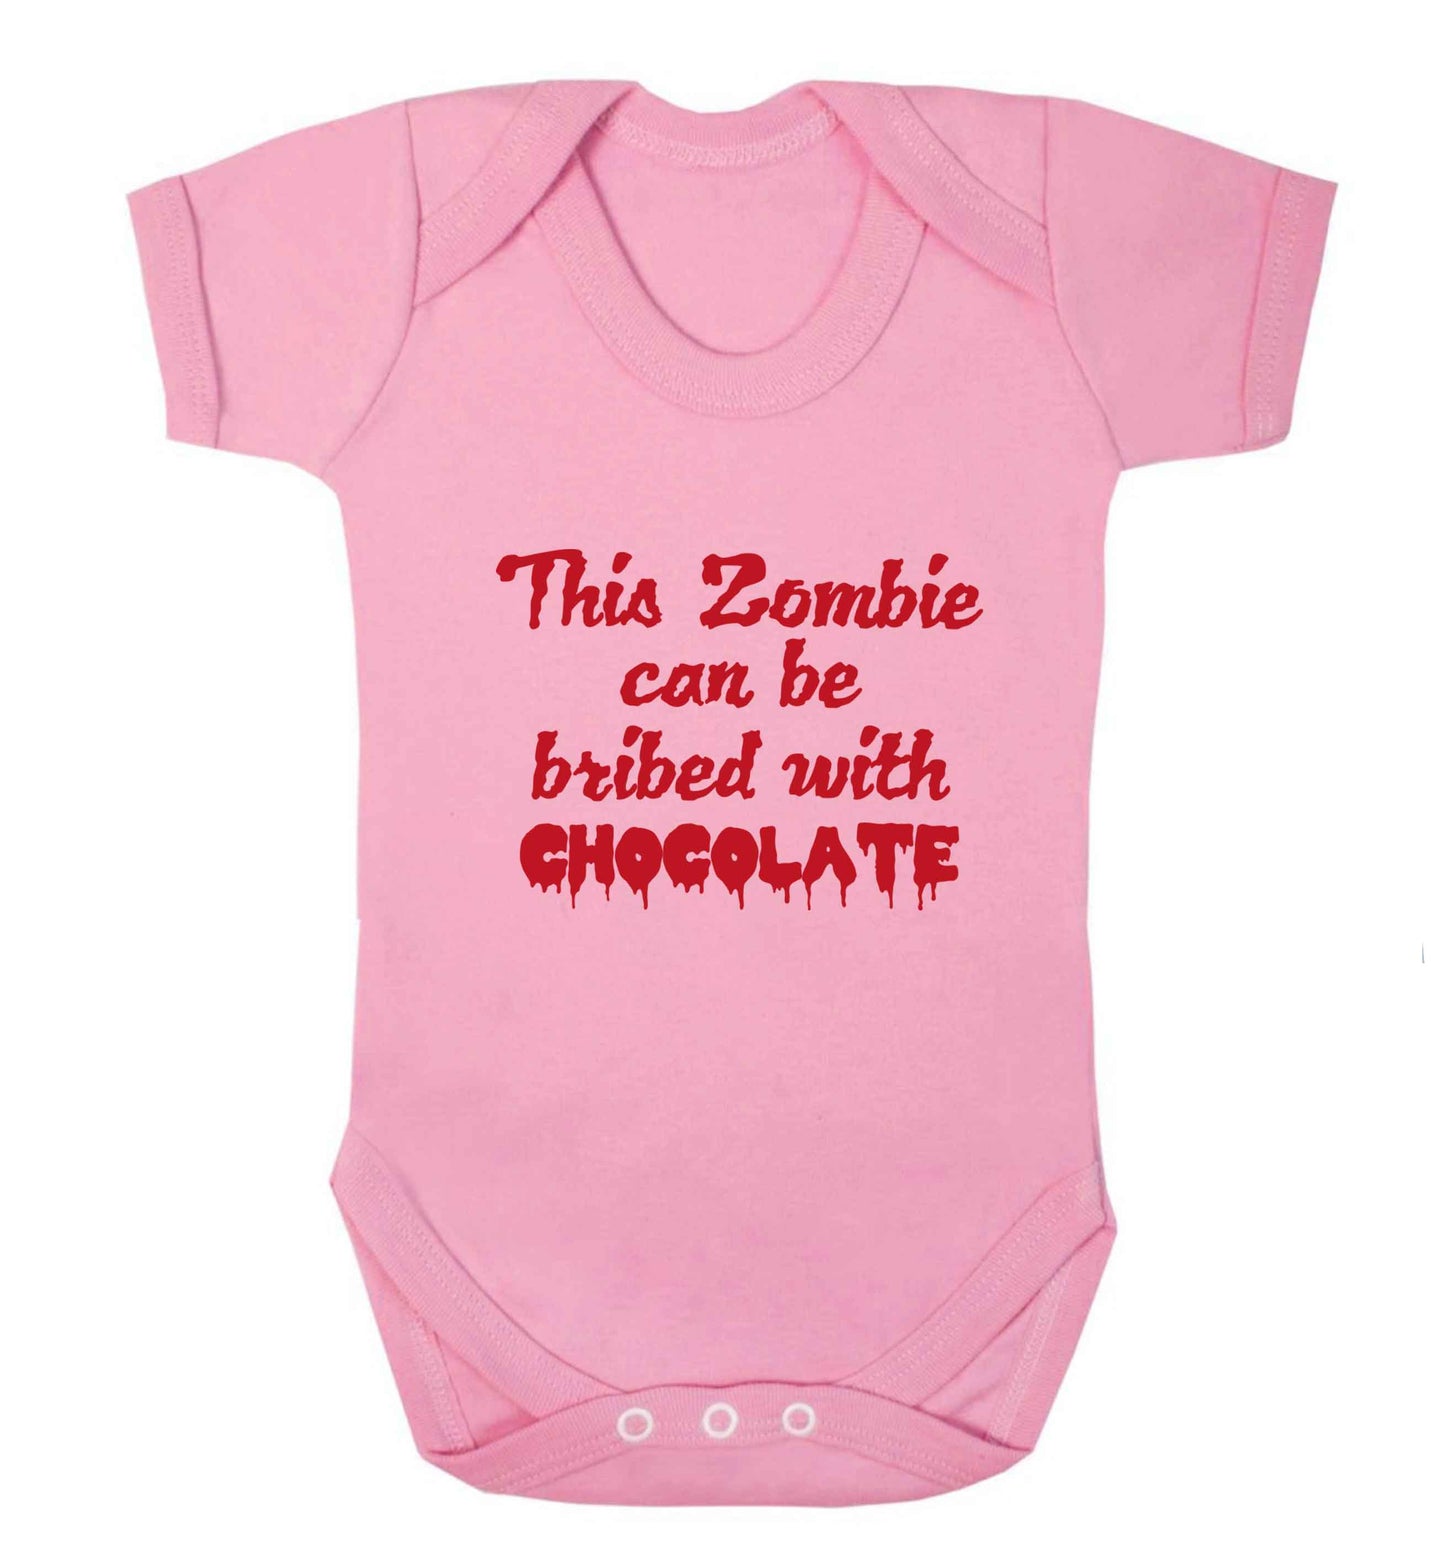 This zombie can be bribed with chocolate baby vest pale pink 18-24 months